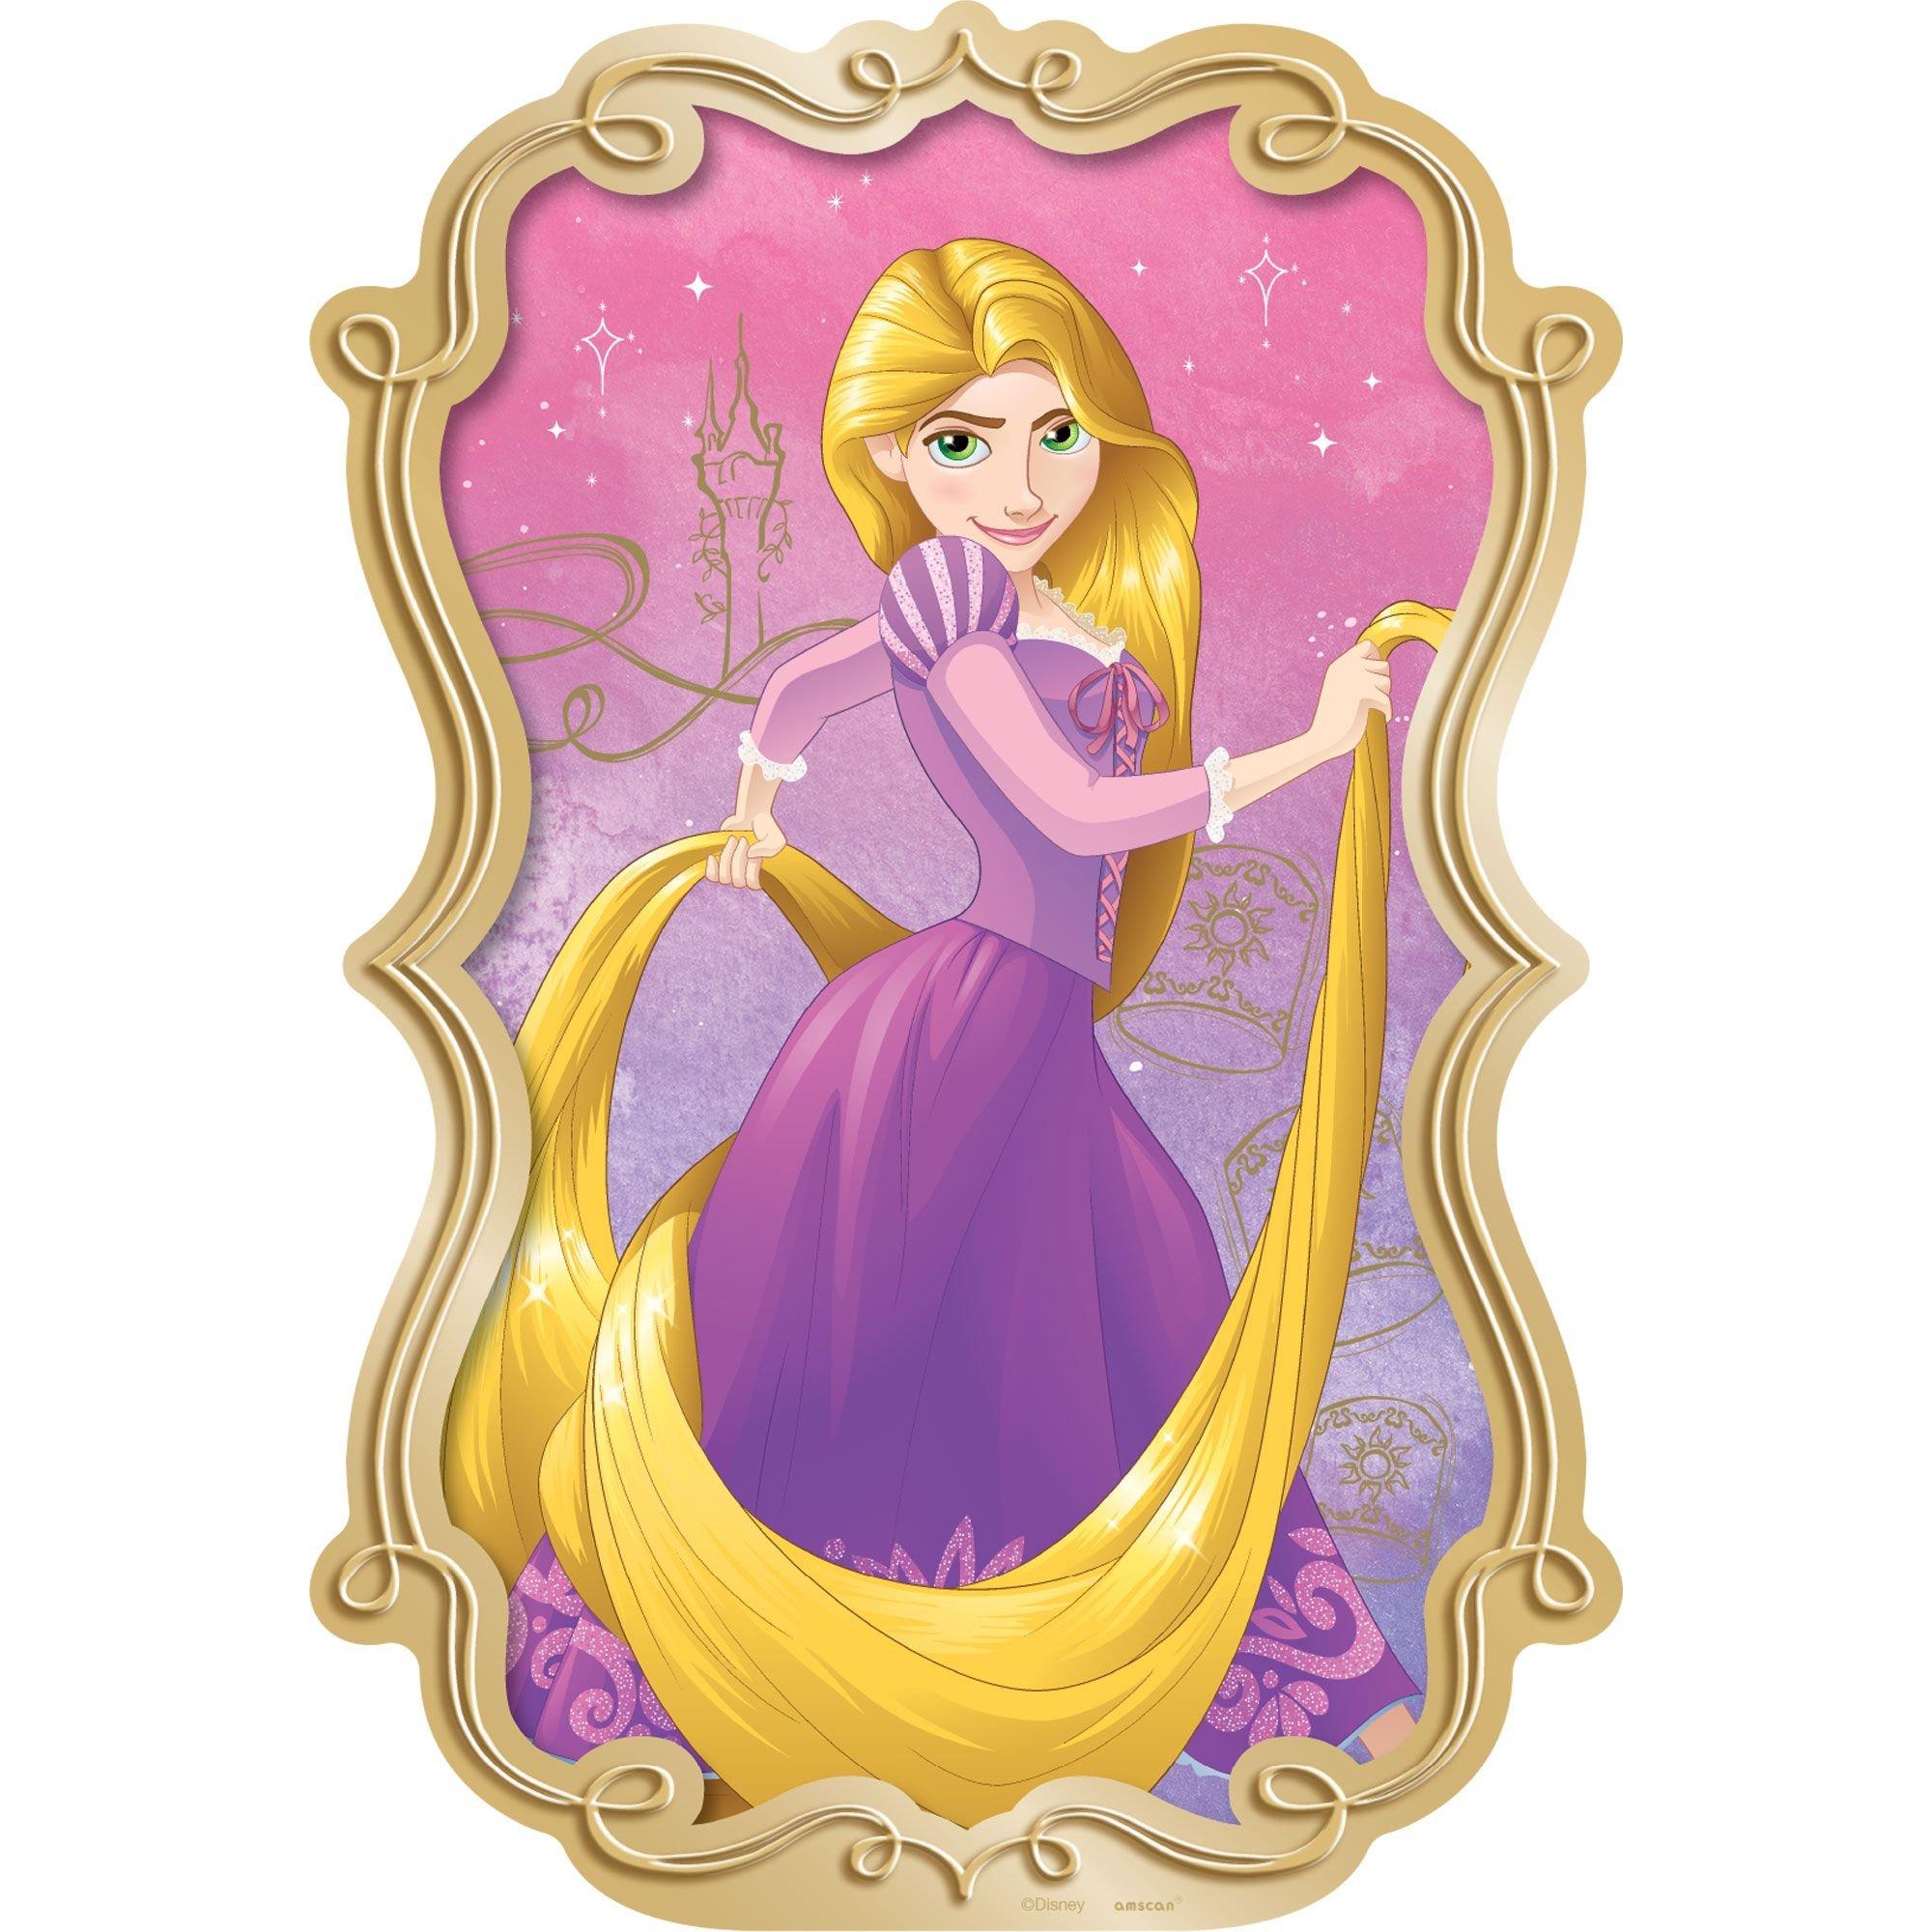 Rapunzel (Tangled) Light Switch Plate Cover, Tangled Decor, Rapunzel Decor,  Repunzel Nursery, Repunzel Gift, Tangled Gift, TAN2